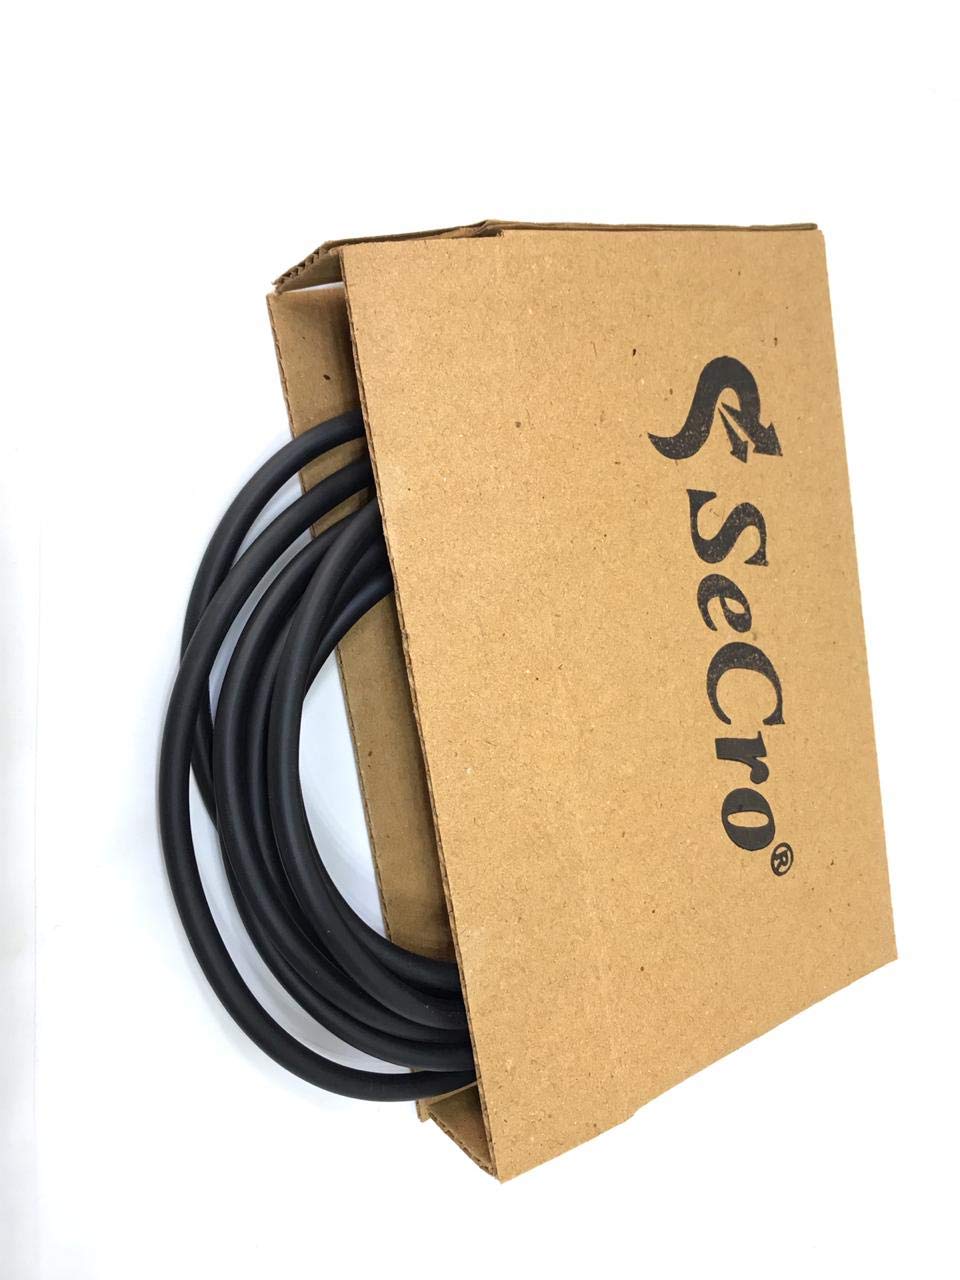 SeCro Microphone Cable 6.35 mm Mono to XLR Female Microphone Cable for  Microphones,Powered Speakers,Sound Consoles and Other Pro Devices (1.5  Meter)